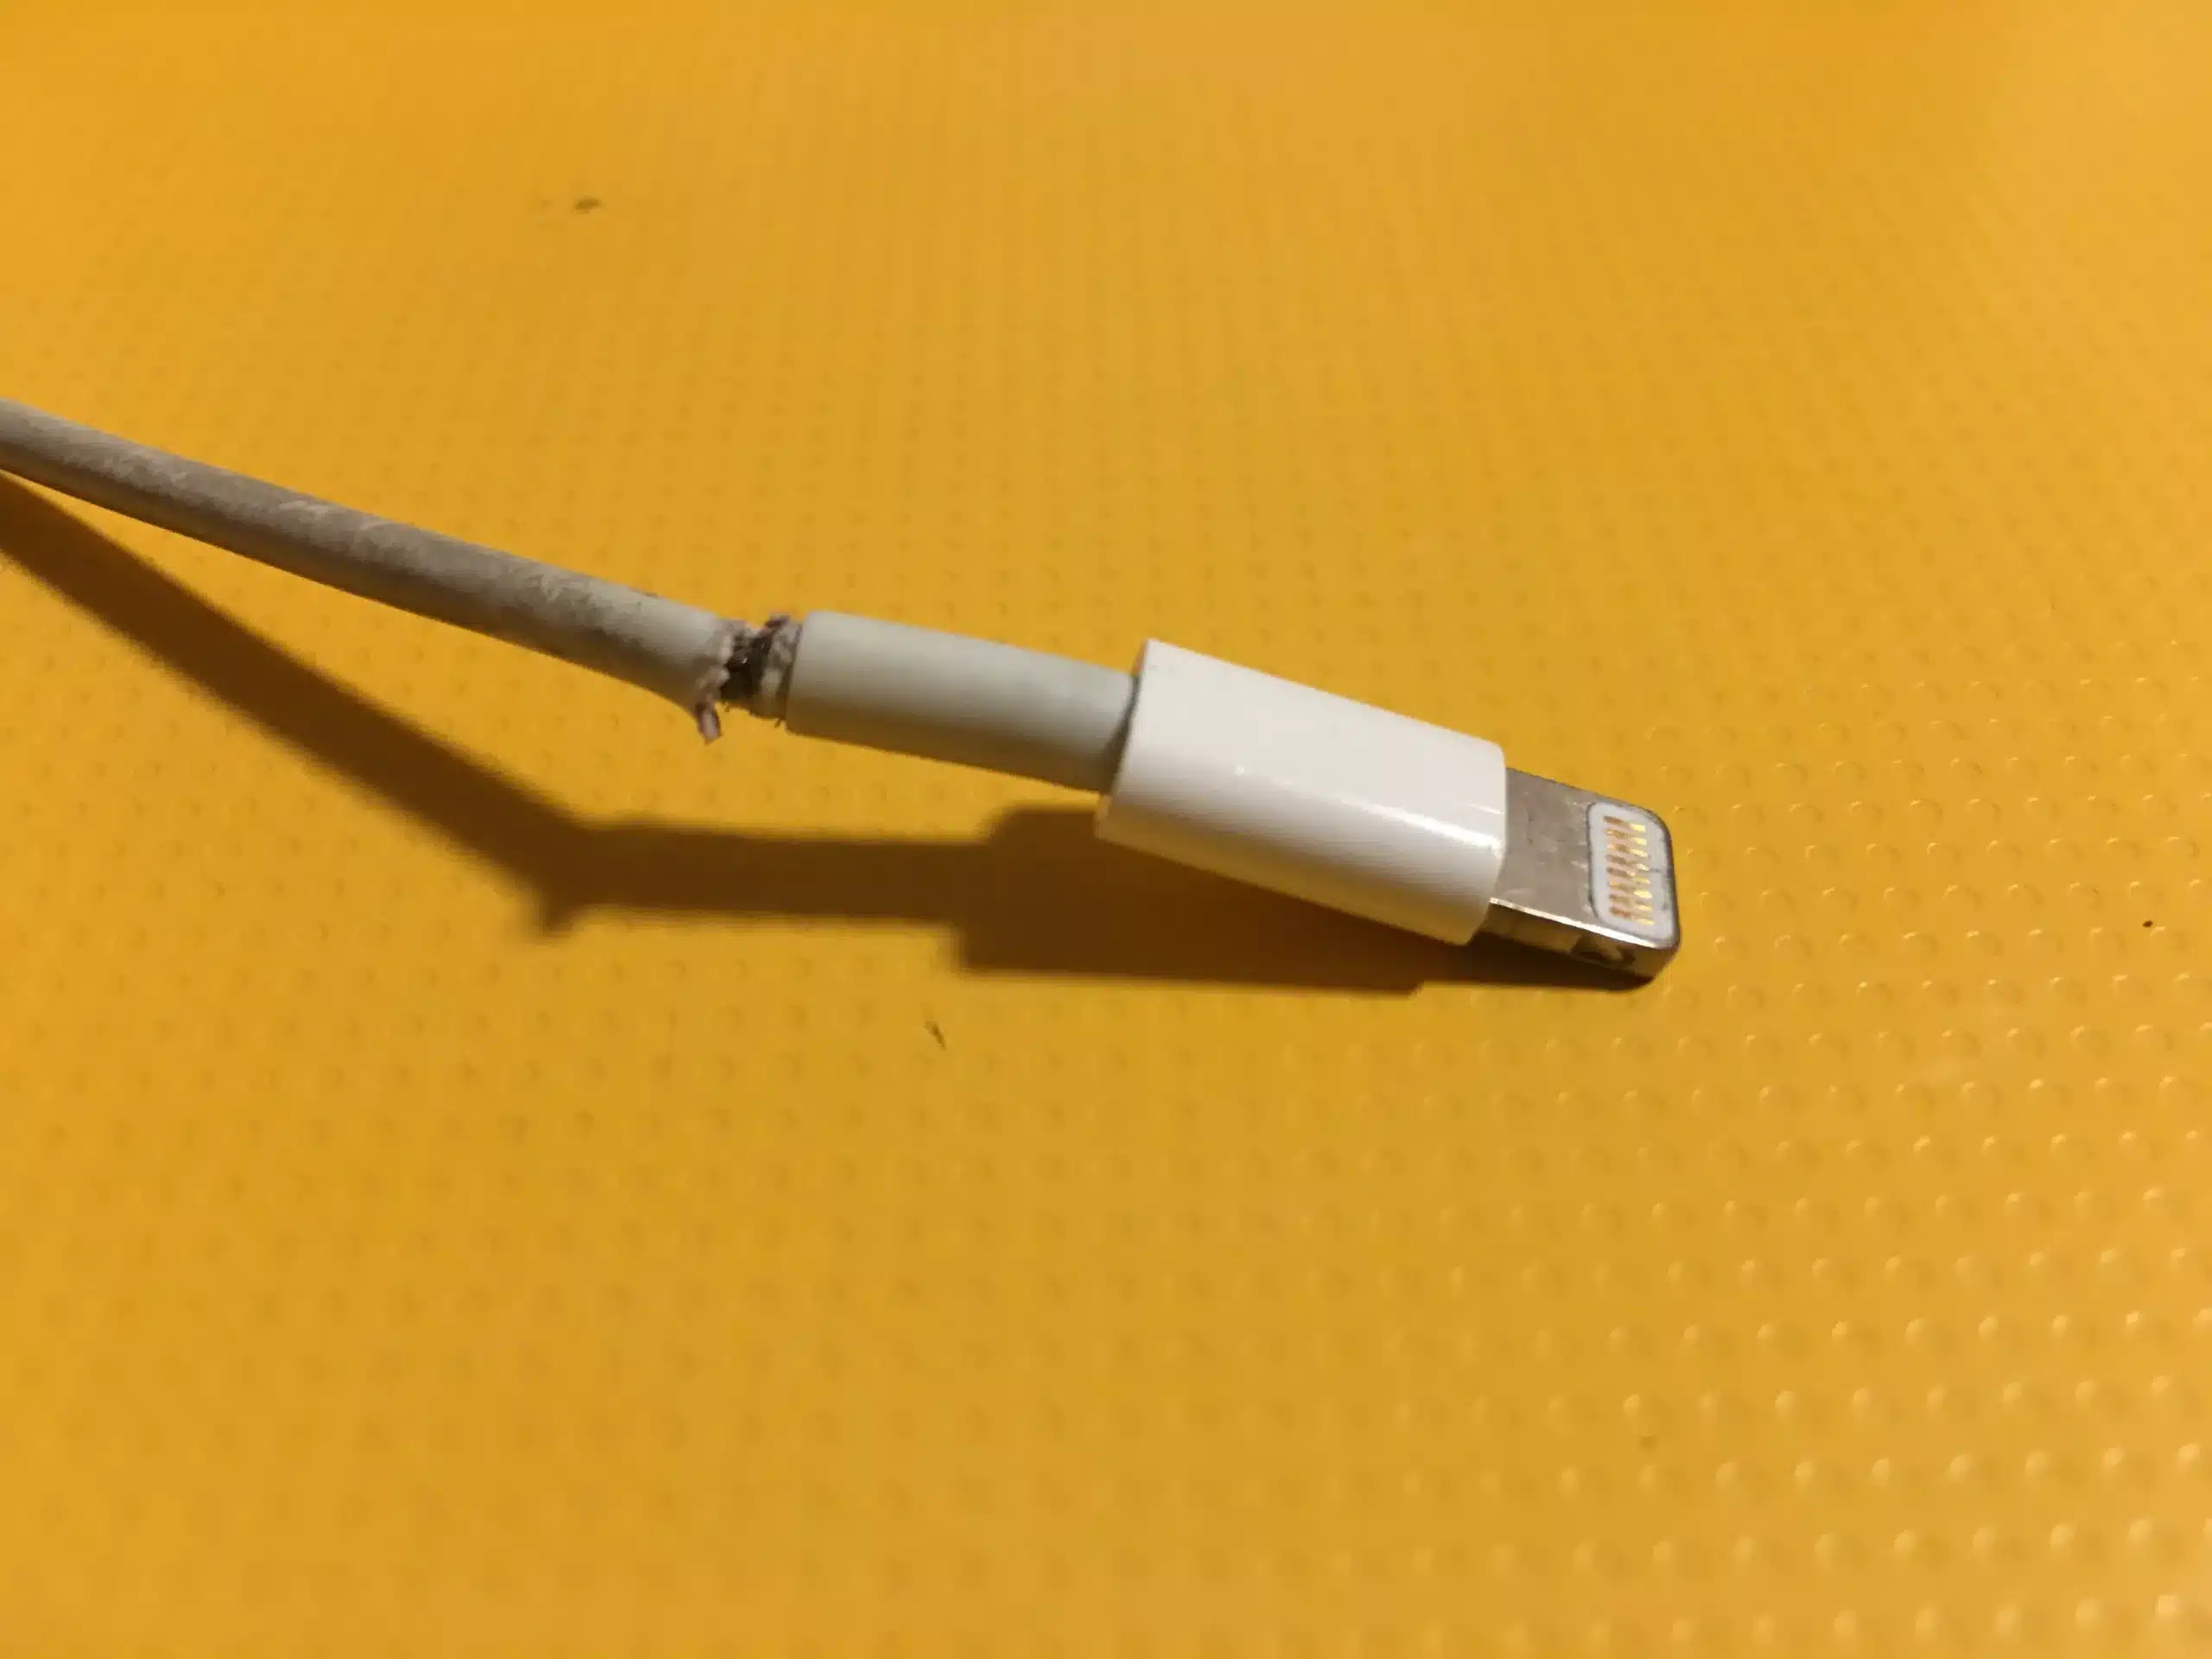 iPhone Won't Charge: Check for Damage in Lightning Cable